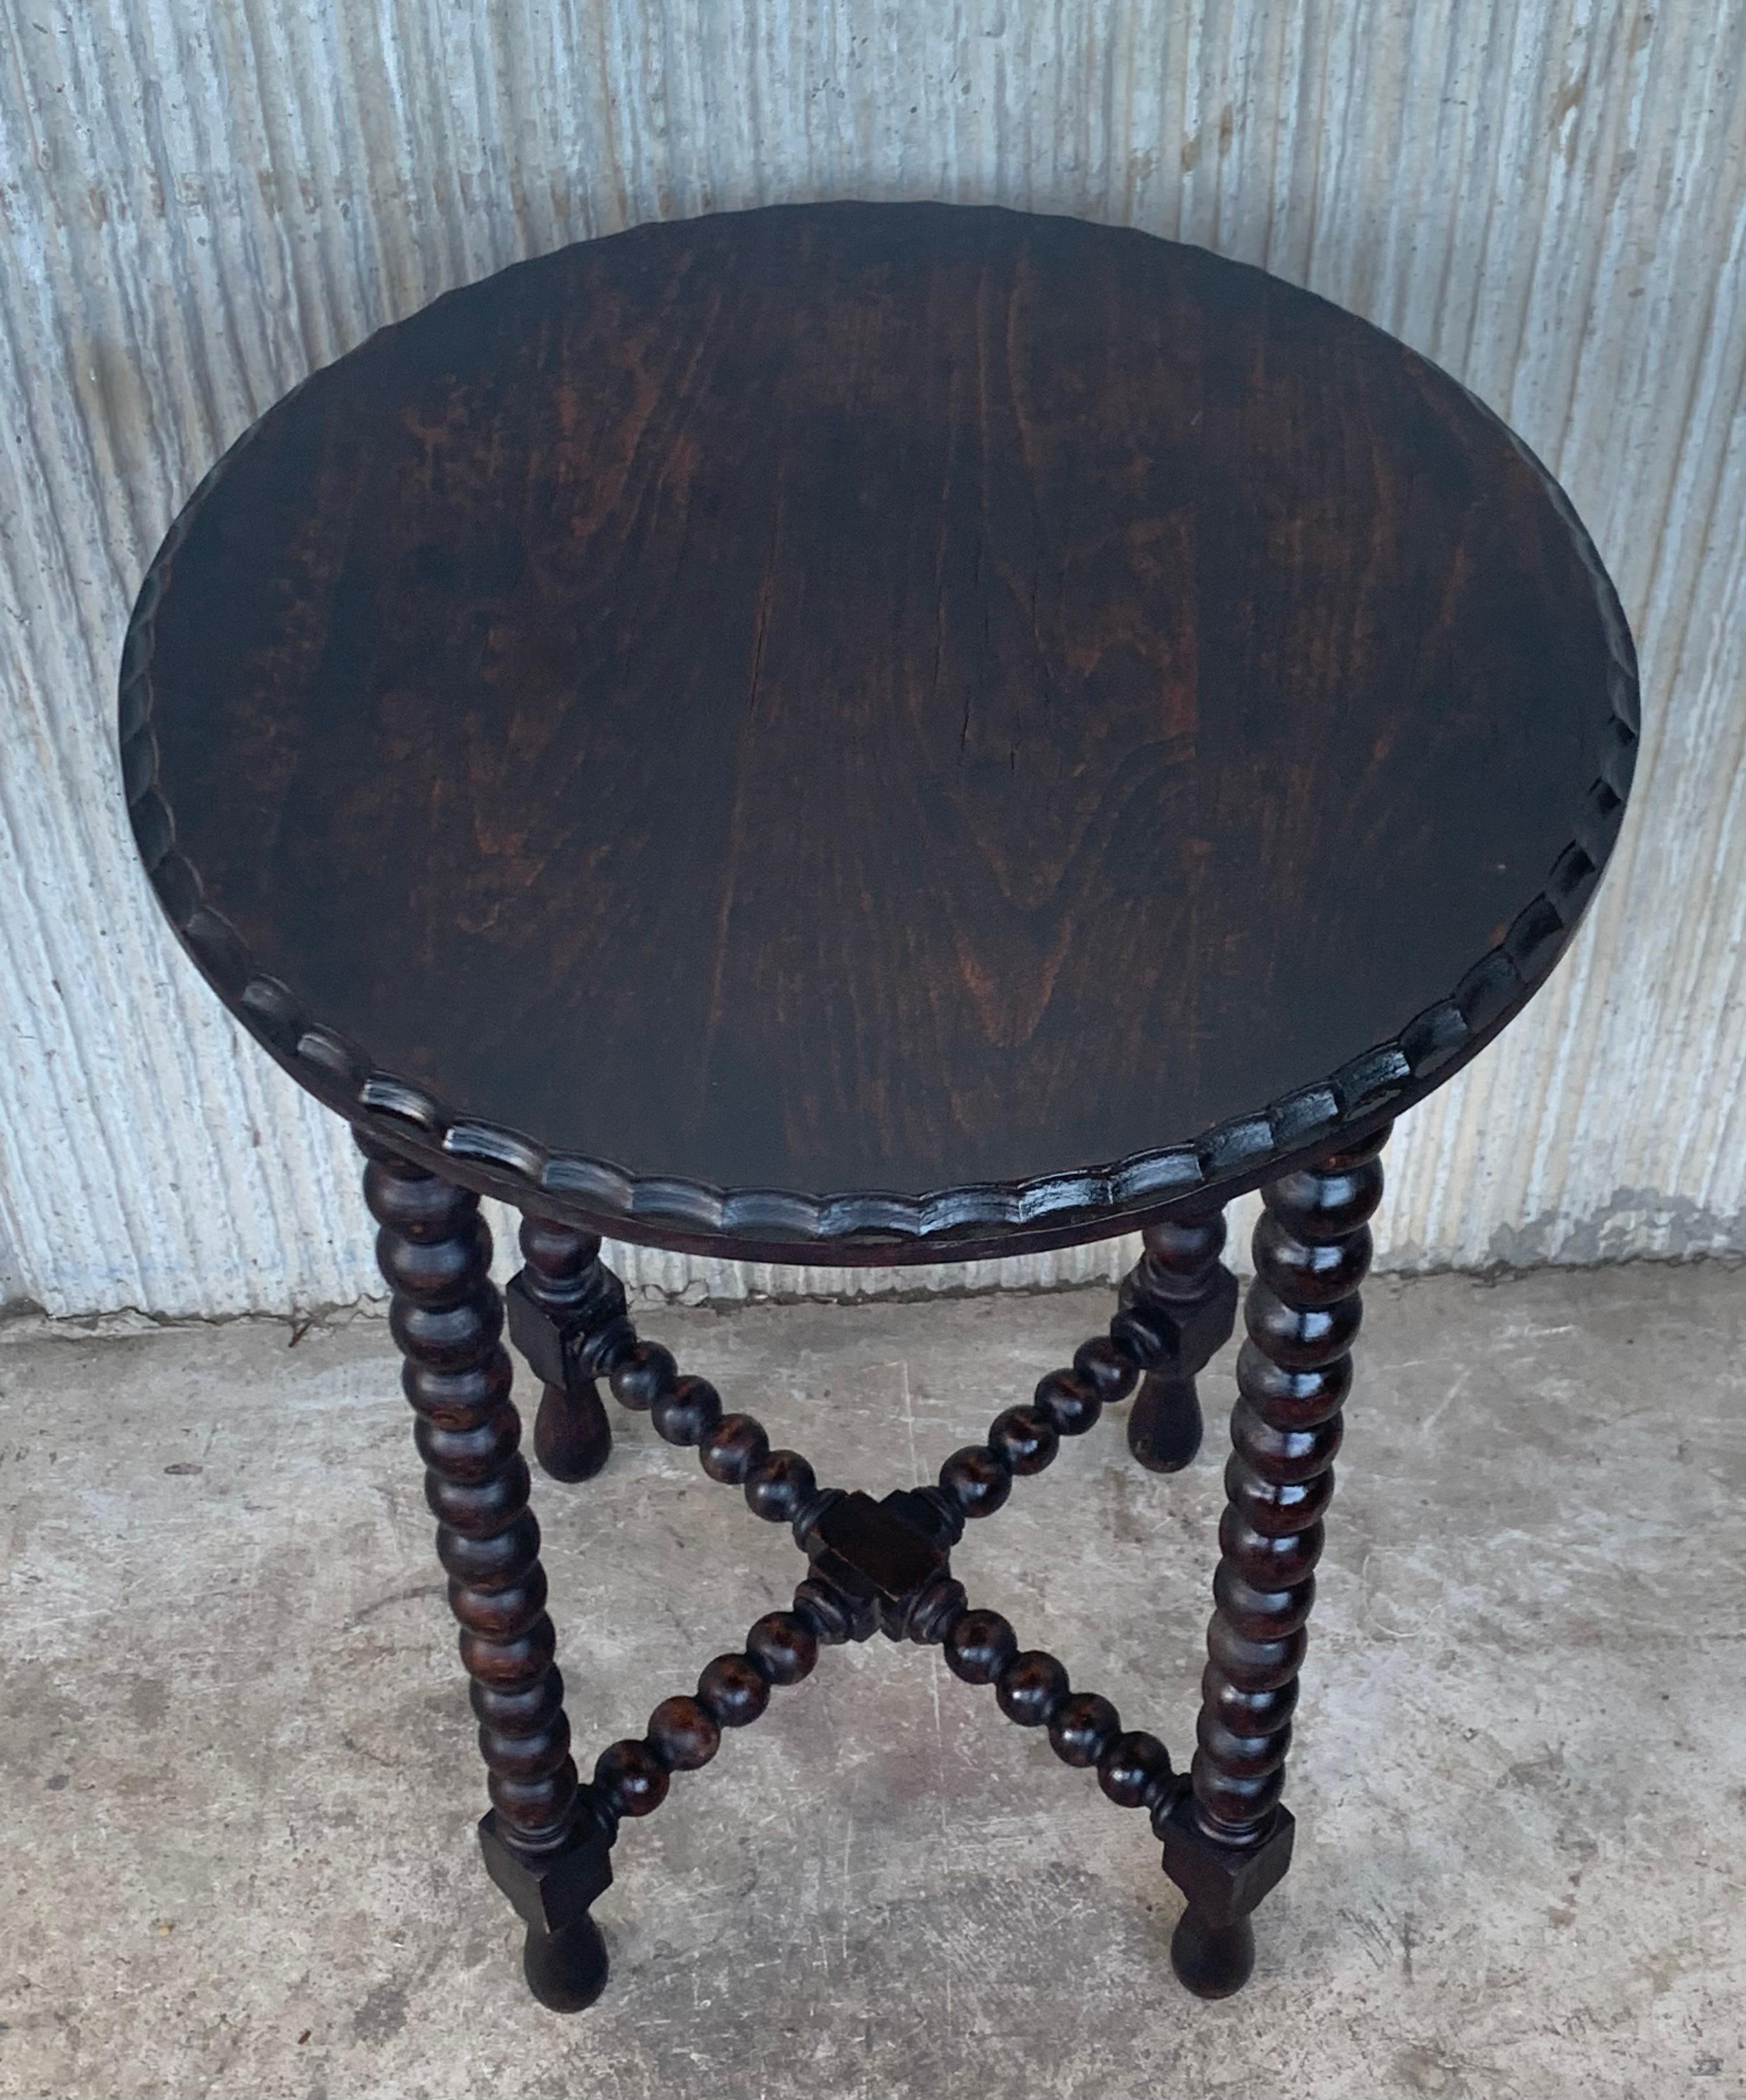 Baroque Spanish 1900s Walnut Round Side Table with Turned Legs and Beleveled Edges